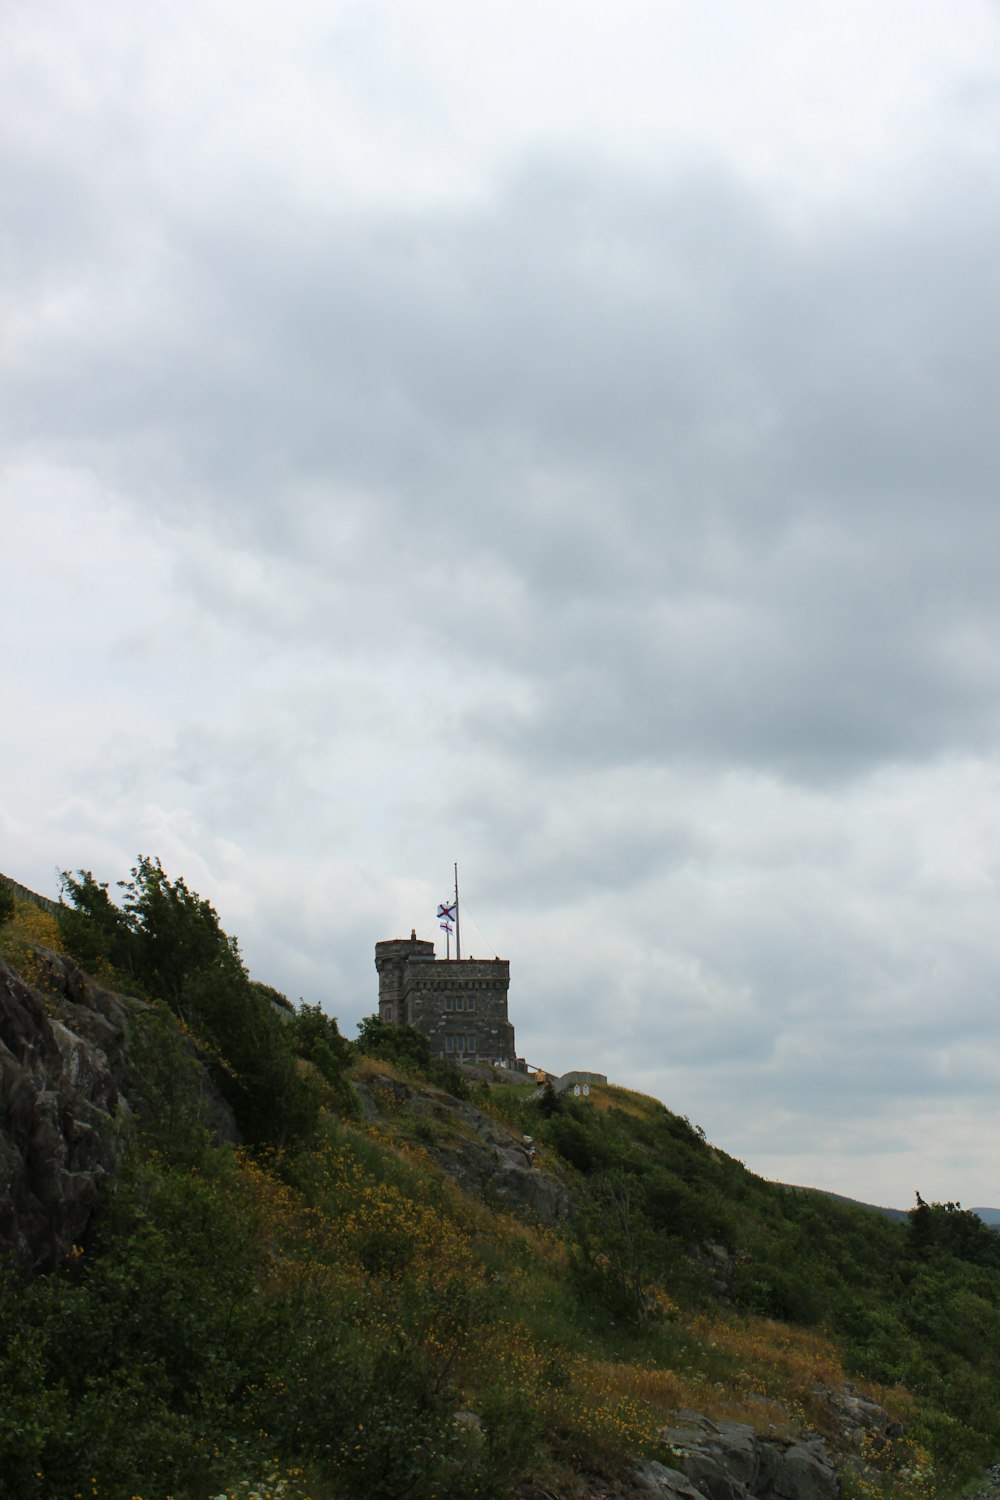 a tower on a hill with a flag on top